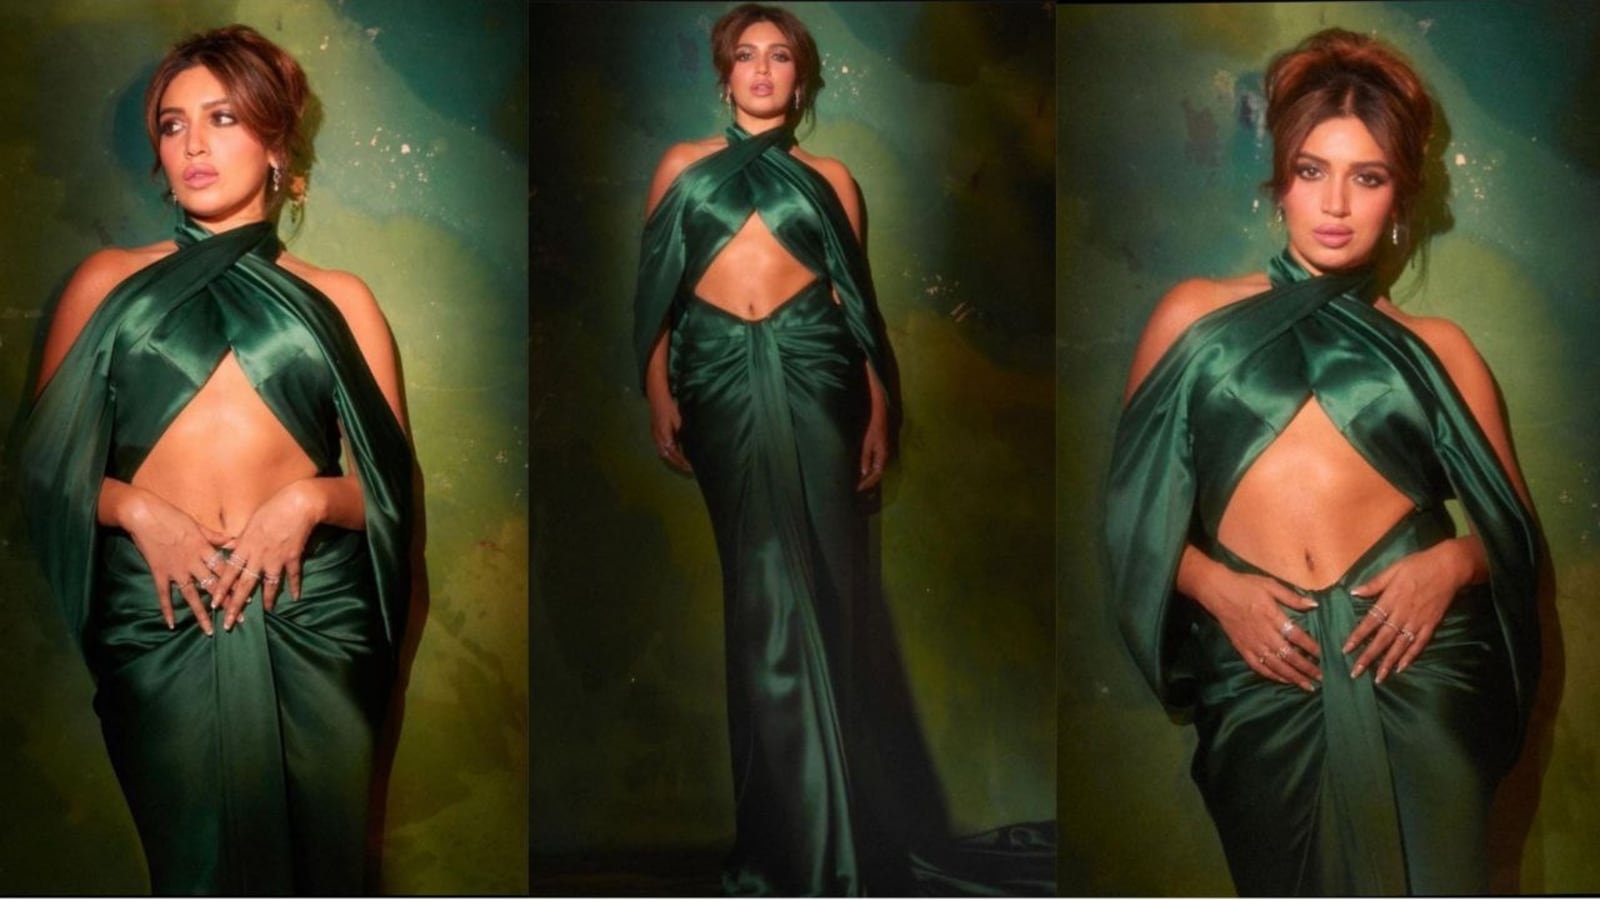 Bhumi Pednekar flaunts her toned abs in sultry emerald green cut-out gown